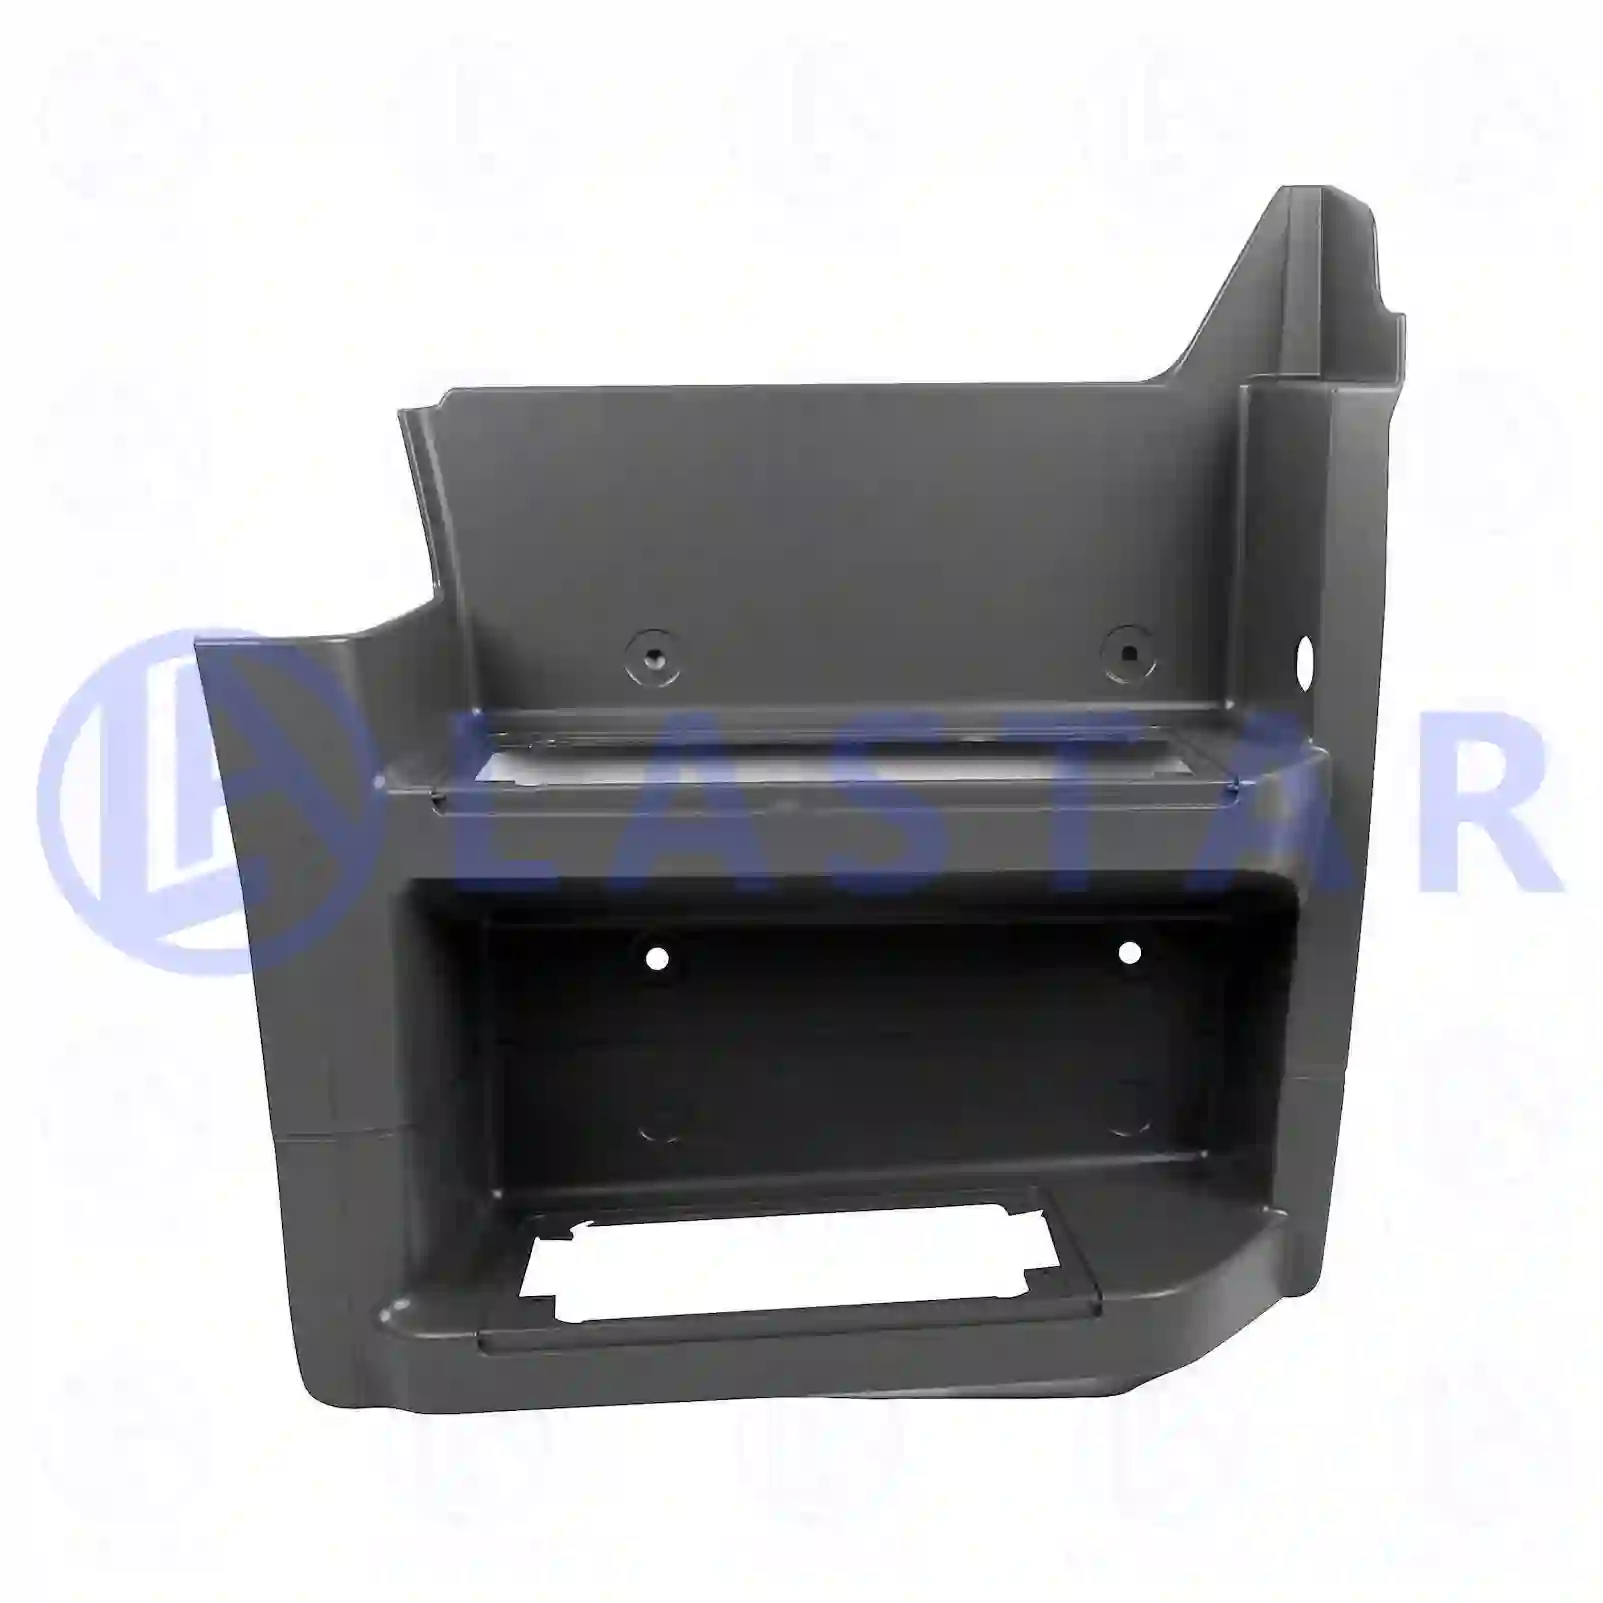 Step well case, lower, right, 77719049, 3756661101, 37566611017354, 9406604801, 9406660201 ||  77719049 Lastar Spare Part | Truck Spare Parts, Auotomotive Spare Parts Step well case, lower, right, 77719049, 3756661101, 37566611017354, 9406604801, 9406660201 ||  77719049 Lastar Spare Part | Truck Spare Parts, Auotomotive Spare Parts